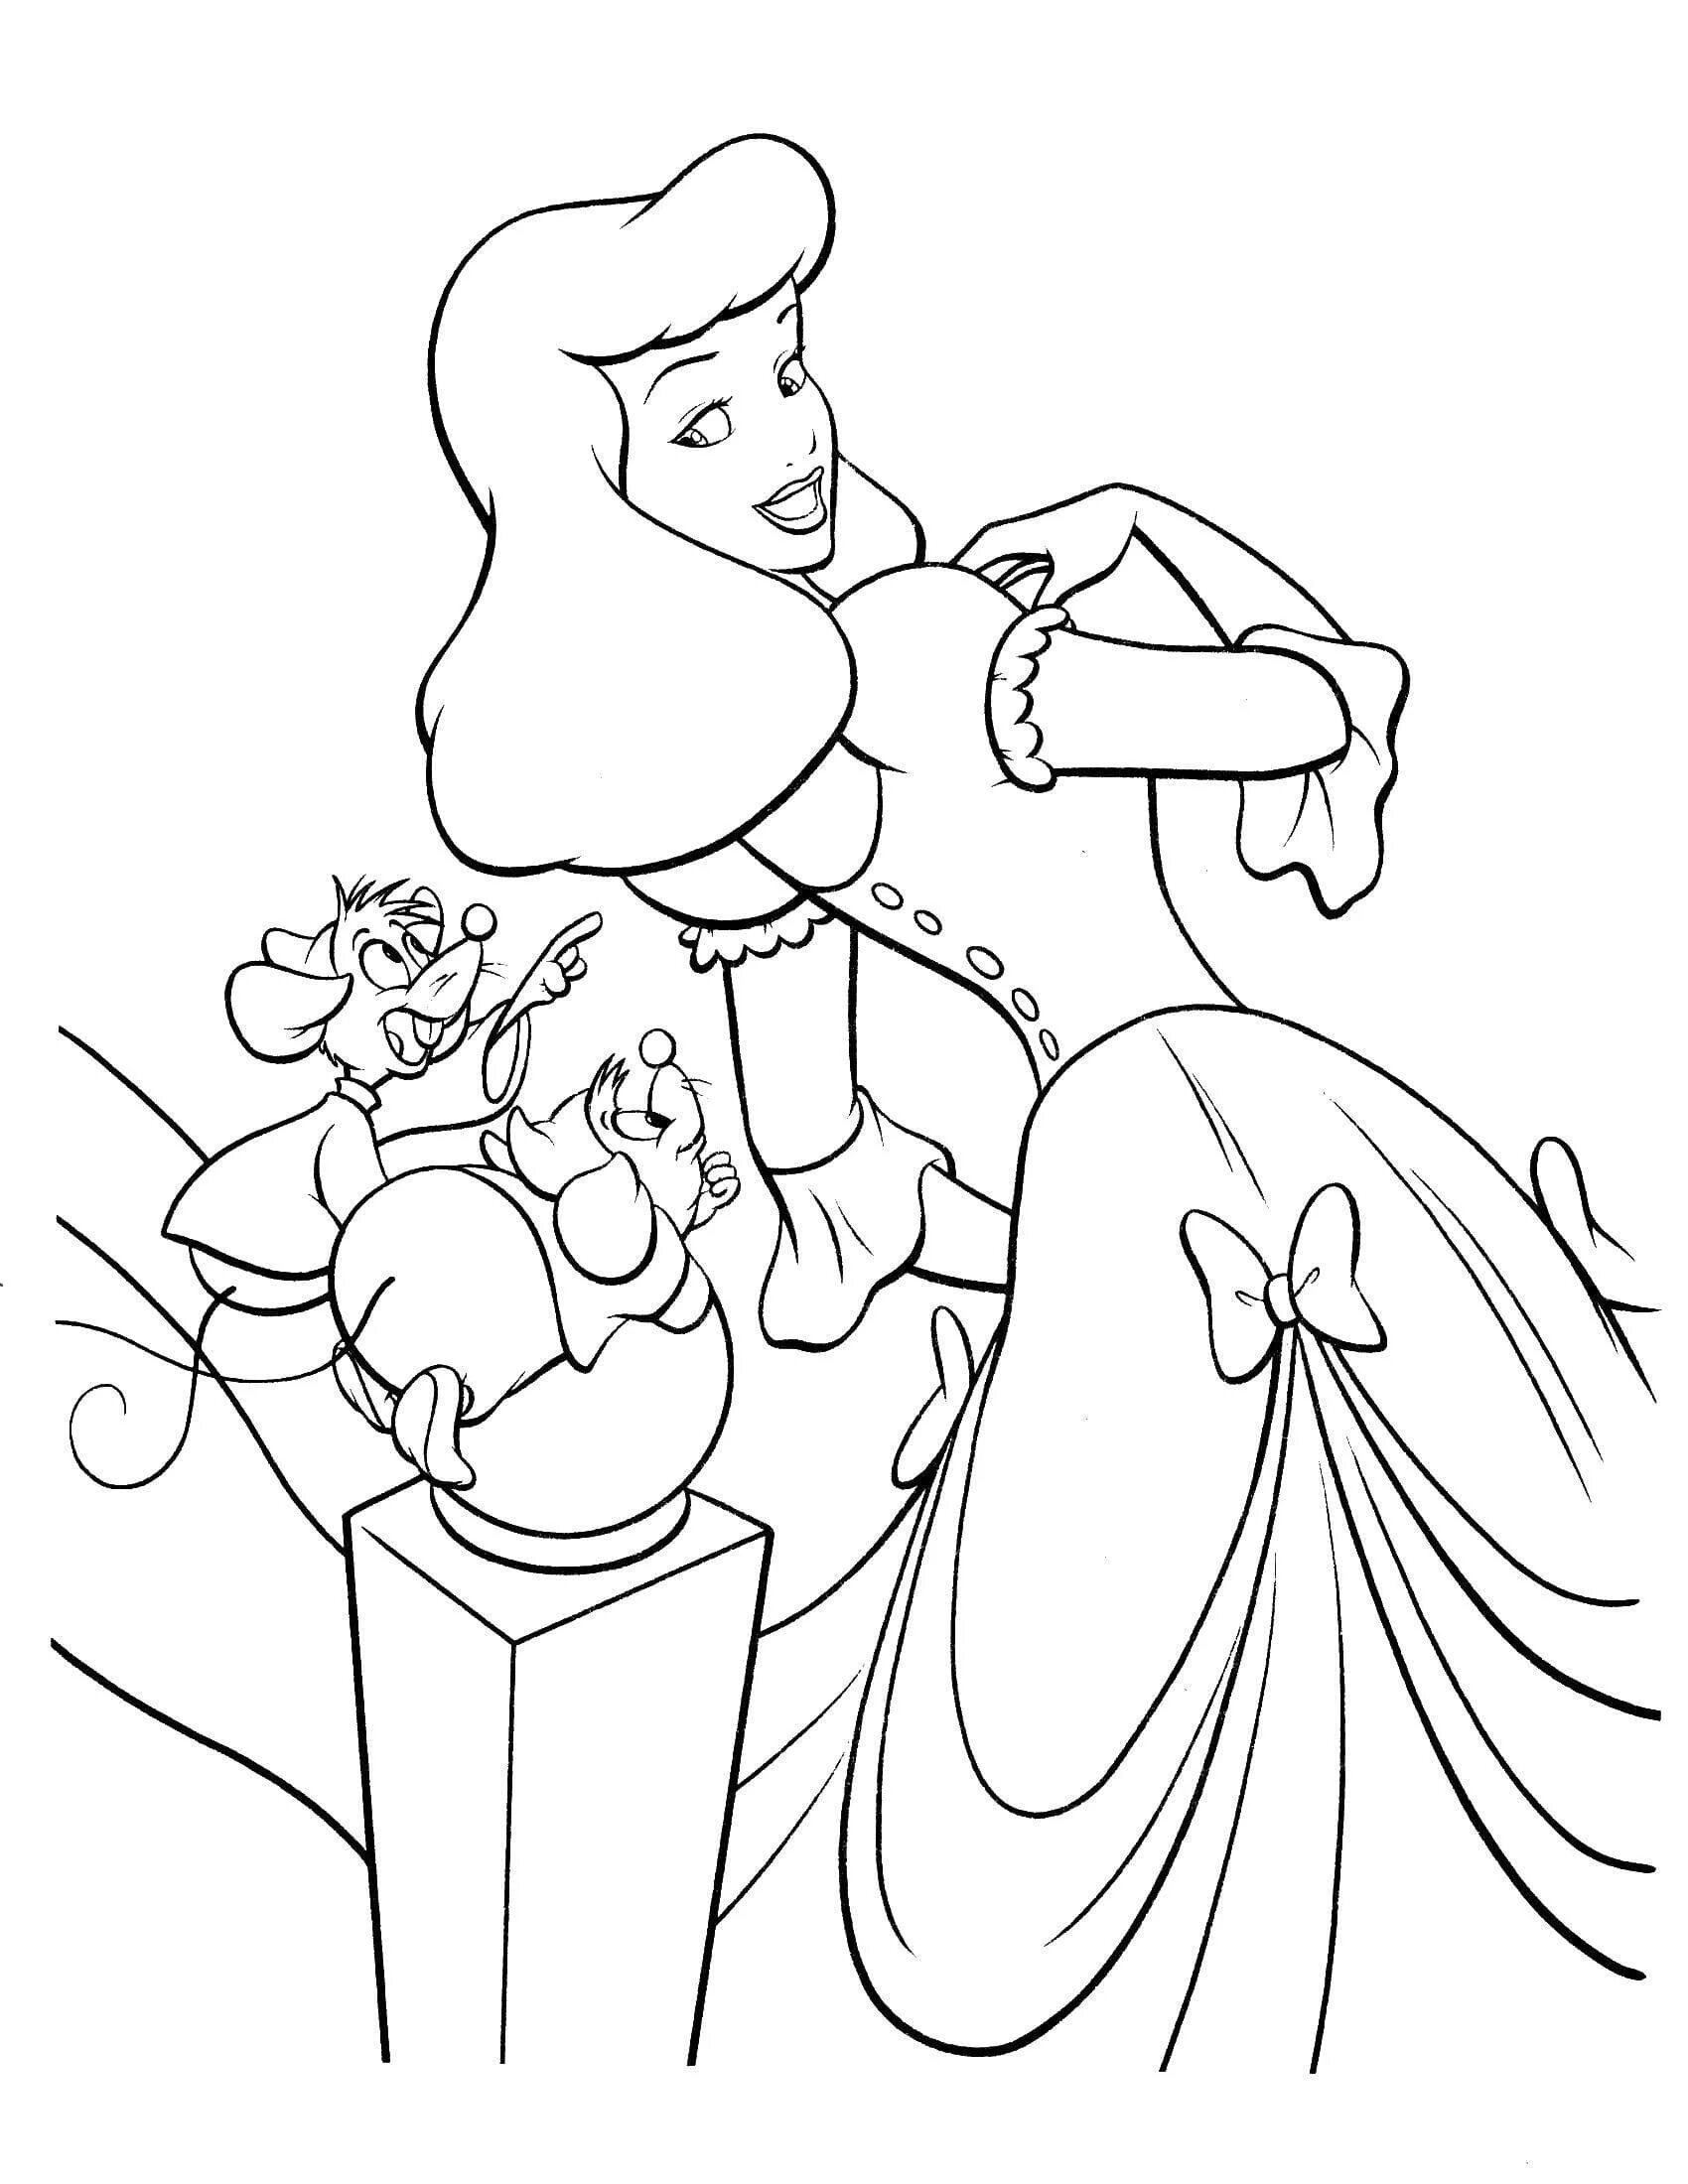 Playful Cinderella Coloring Page for Toddlers